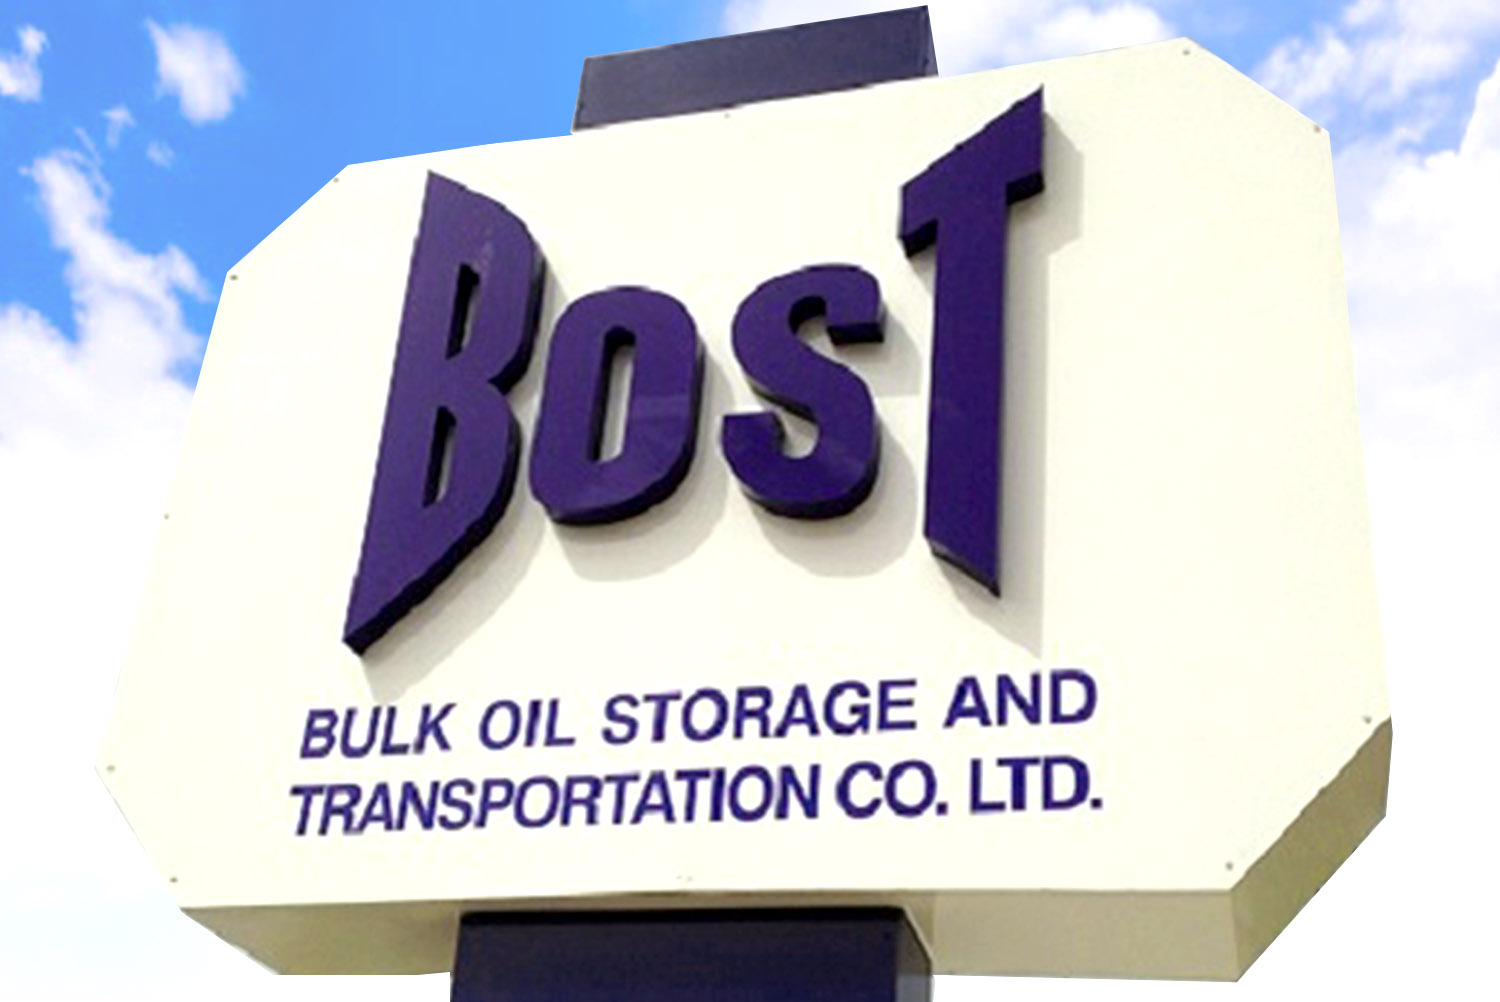 BOST spent GHS285,412 to buy 18 iPhones 13s for its staff: An example of wasting public funds and poor board governance